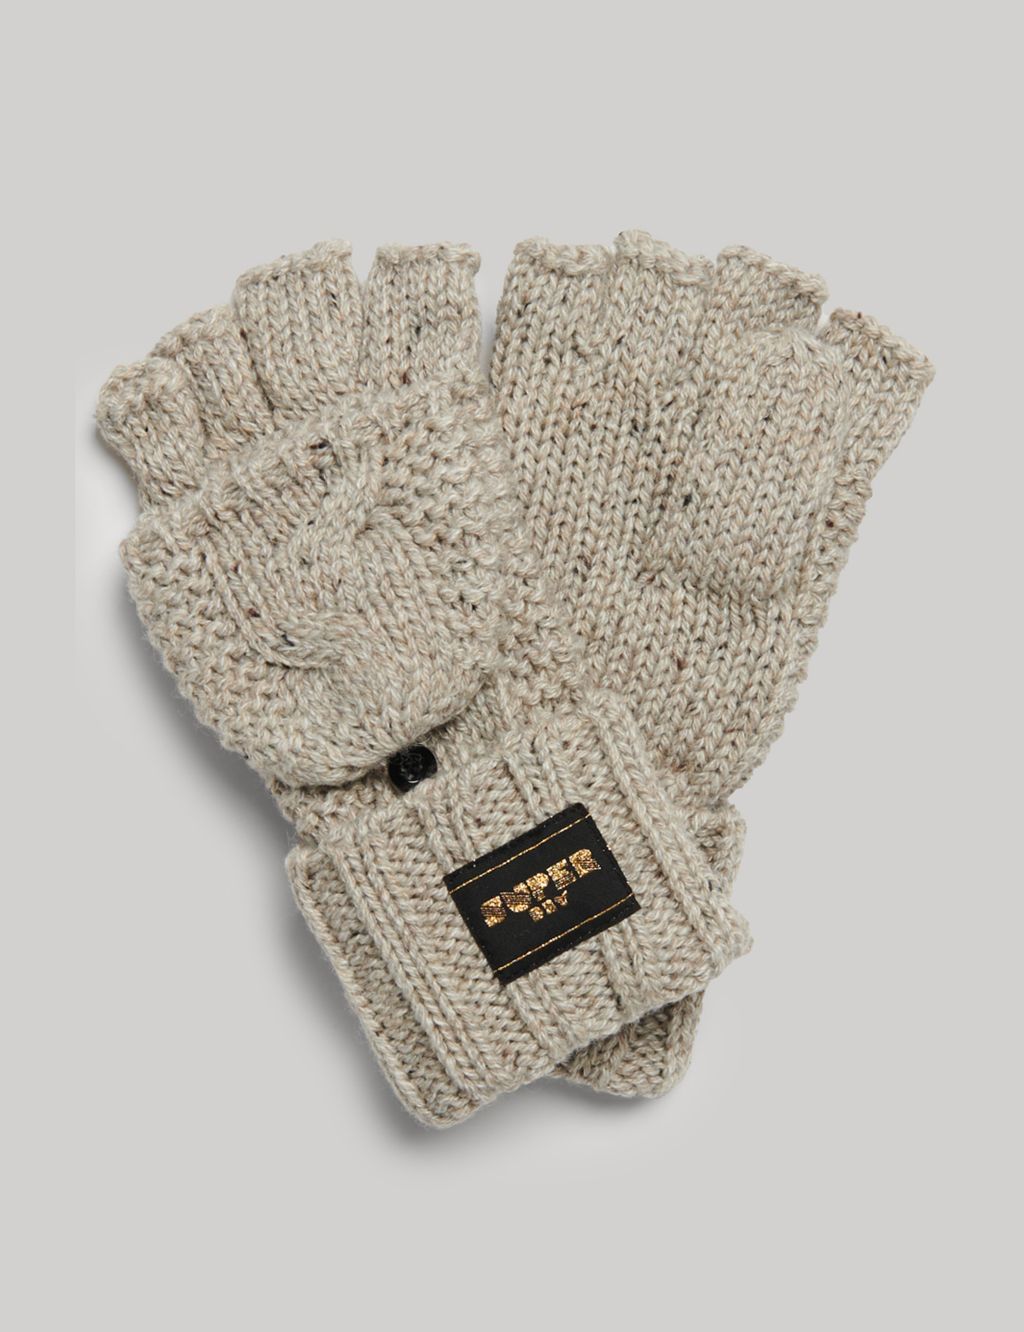 Knitted Cable Gloves with Wool image 2